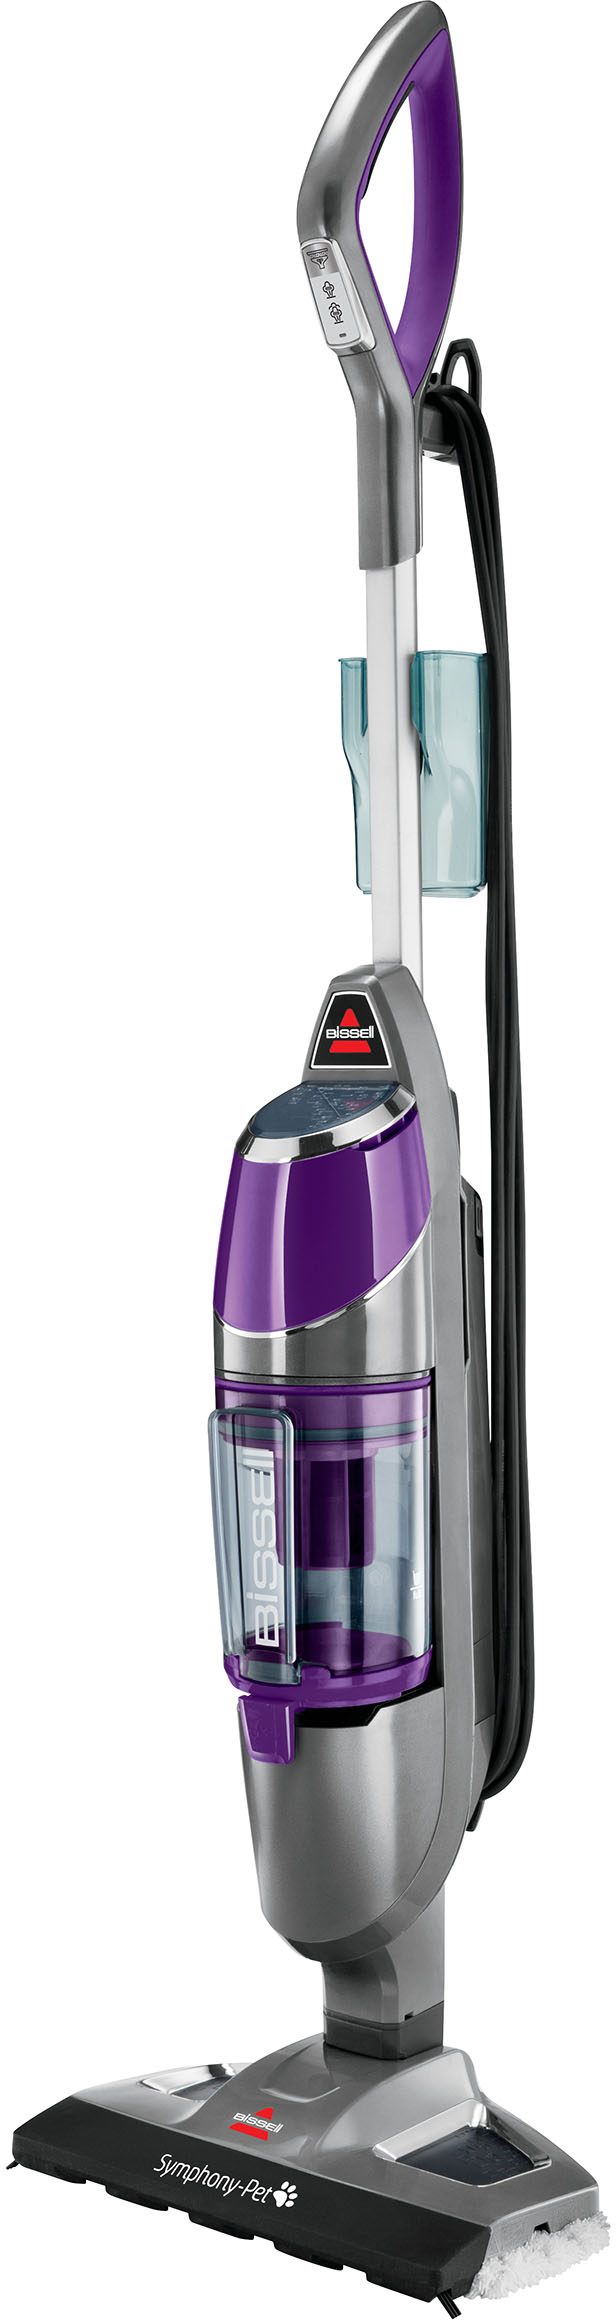 Left View: BISSELL - PowerEdge Lift-Off 2-in-1 Sanitizing Steam Mop - Basanova Blue with White Accents